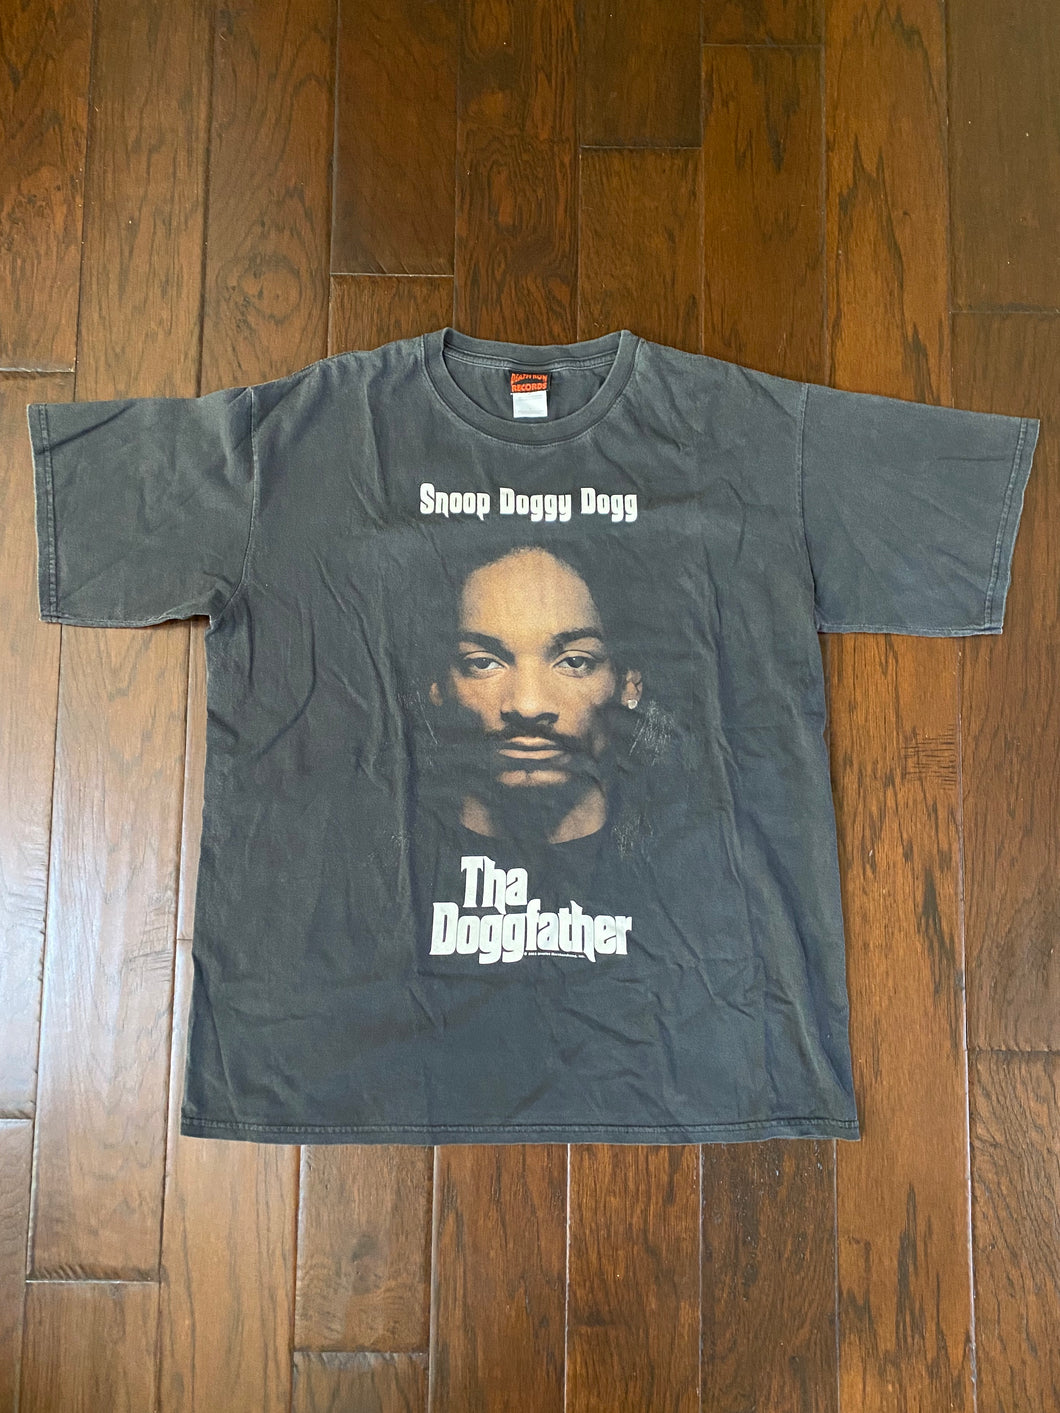 Snoop Doggy Dogg 2005 Death Row Records Tag “Tha Doggfather” Vintage Distressed T-shirt